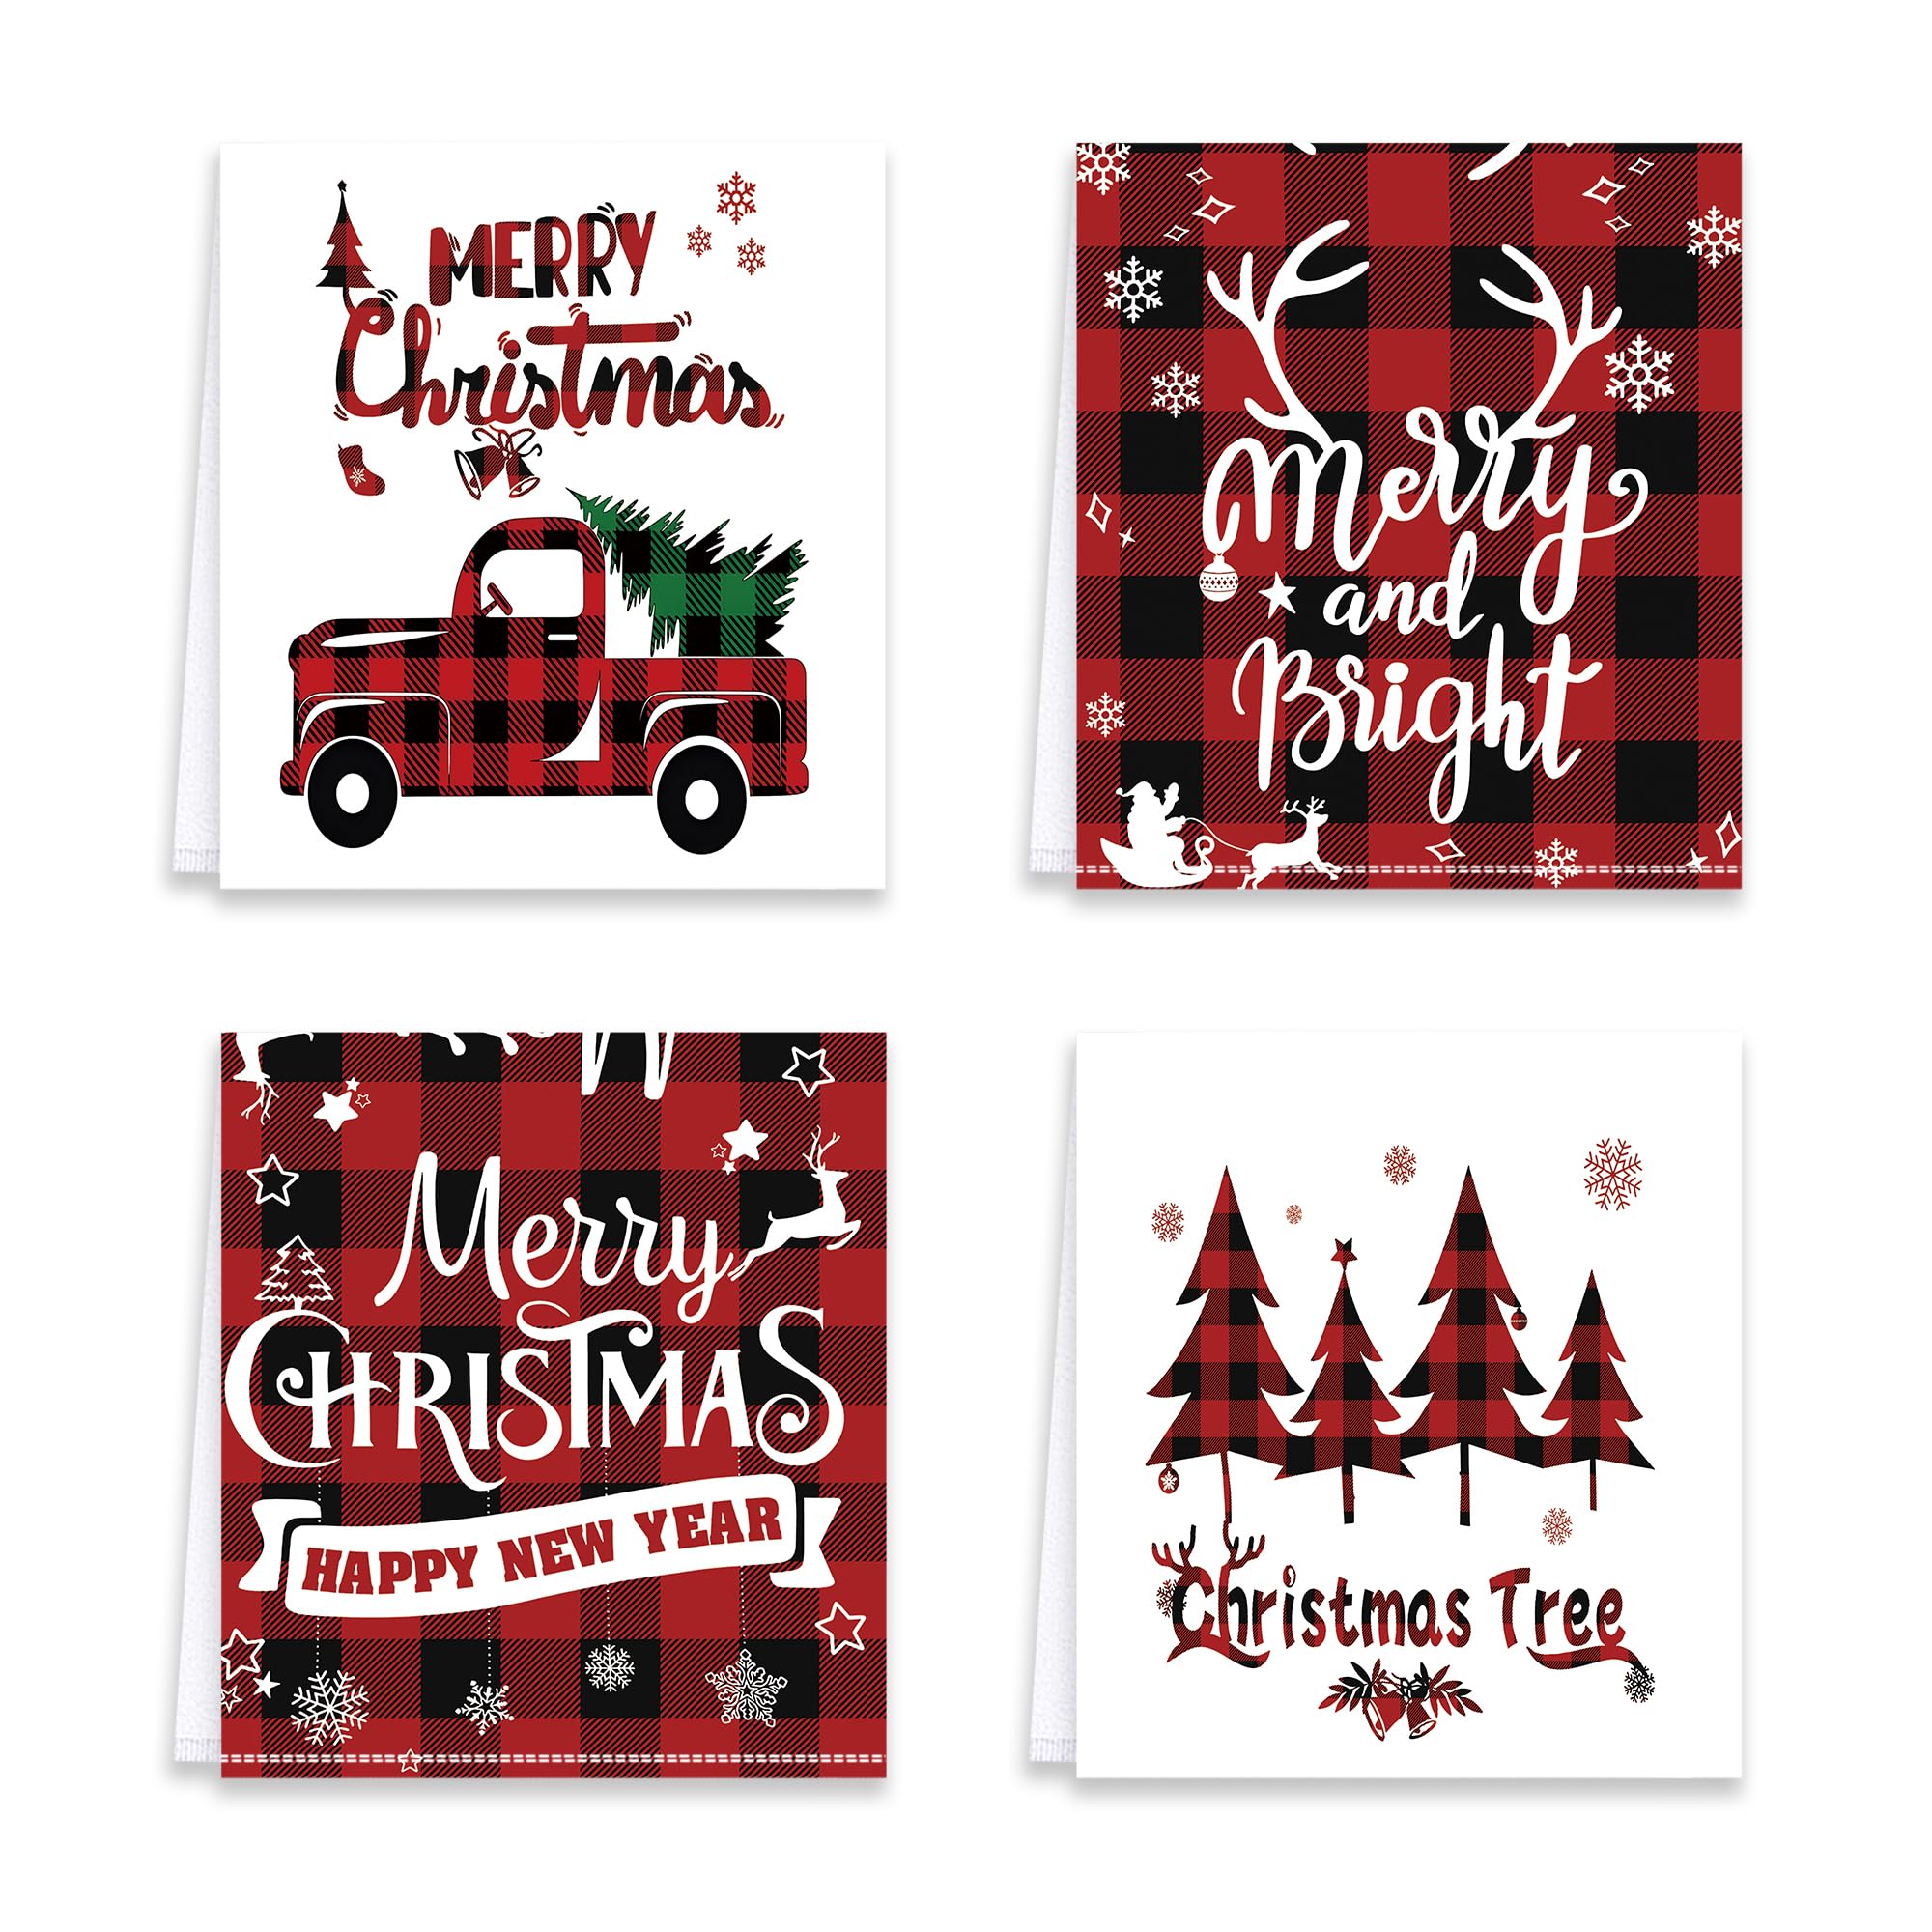 Miryoku Christmas Kitchen Towels Dish Towels Set of 4 Red White Merry Christmas Black Red Plaid Xmas Holiday Decorative Dishcloths Tea Towels for Home Decorations